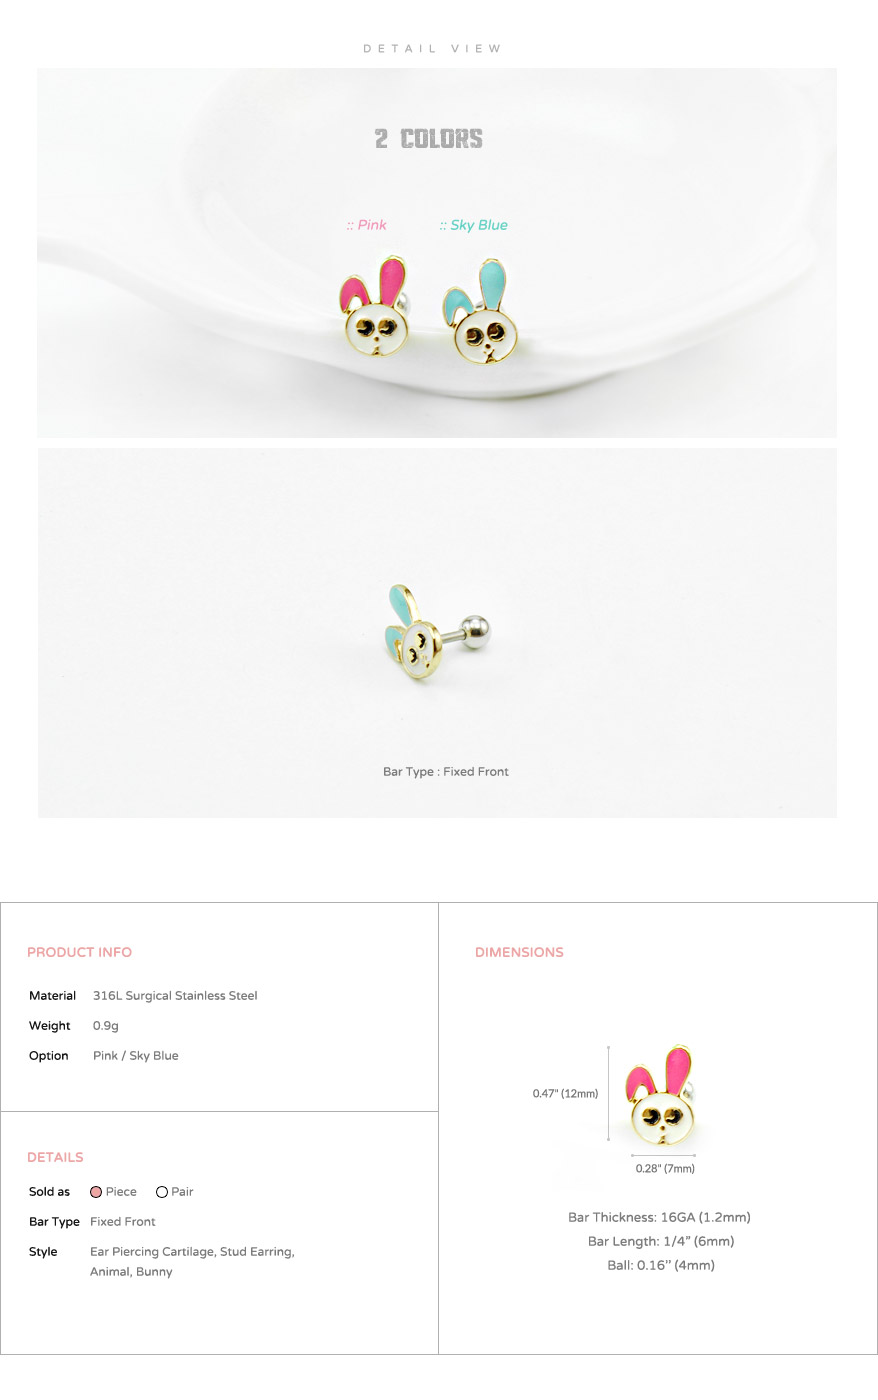 ear_studs_piercing_cartilage_earrings_16g_316l_surgical_stainless_steel_korean_asian_style_jewelry_barbell_bunny_rabbit_cute_3